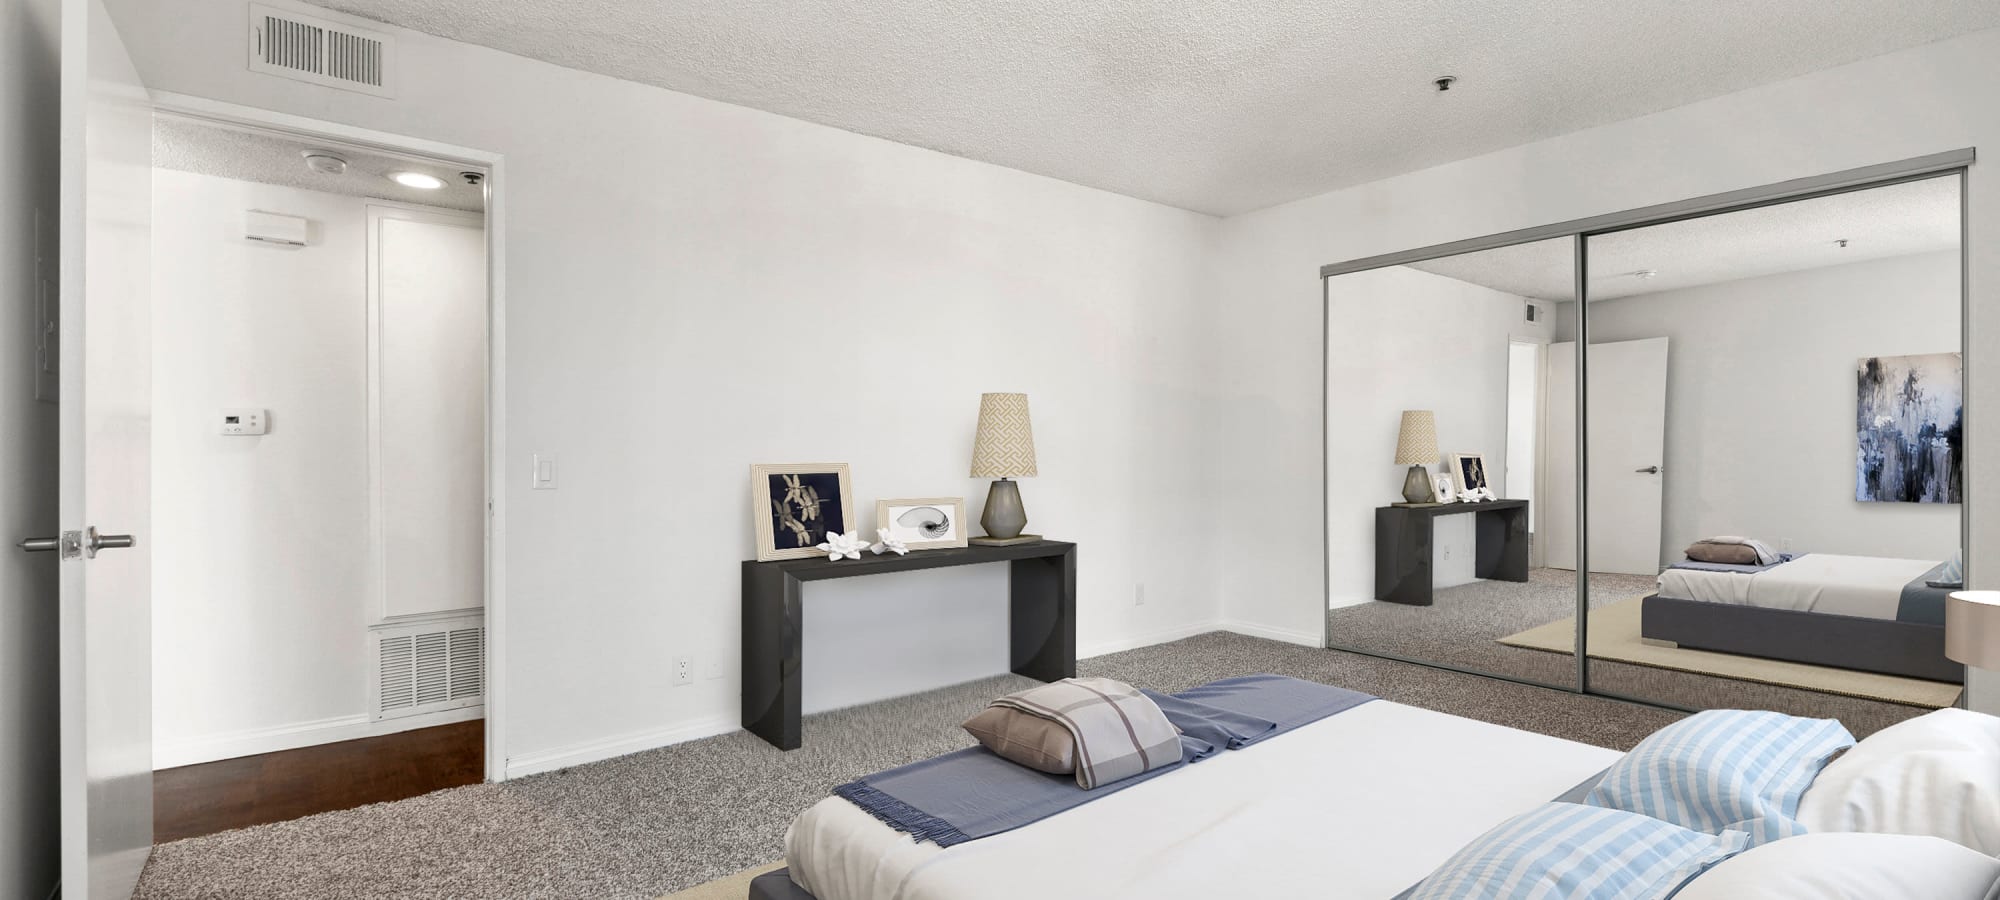 Well decorated model bedroom at The Jessica Apartments, Los Angeles, California